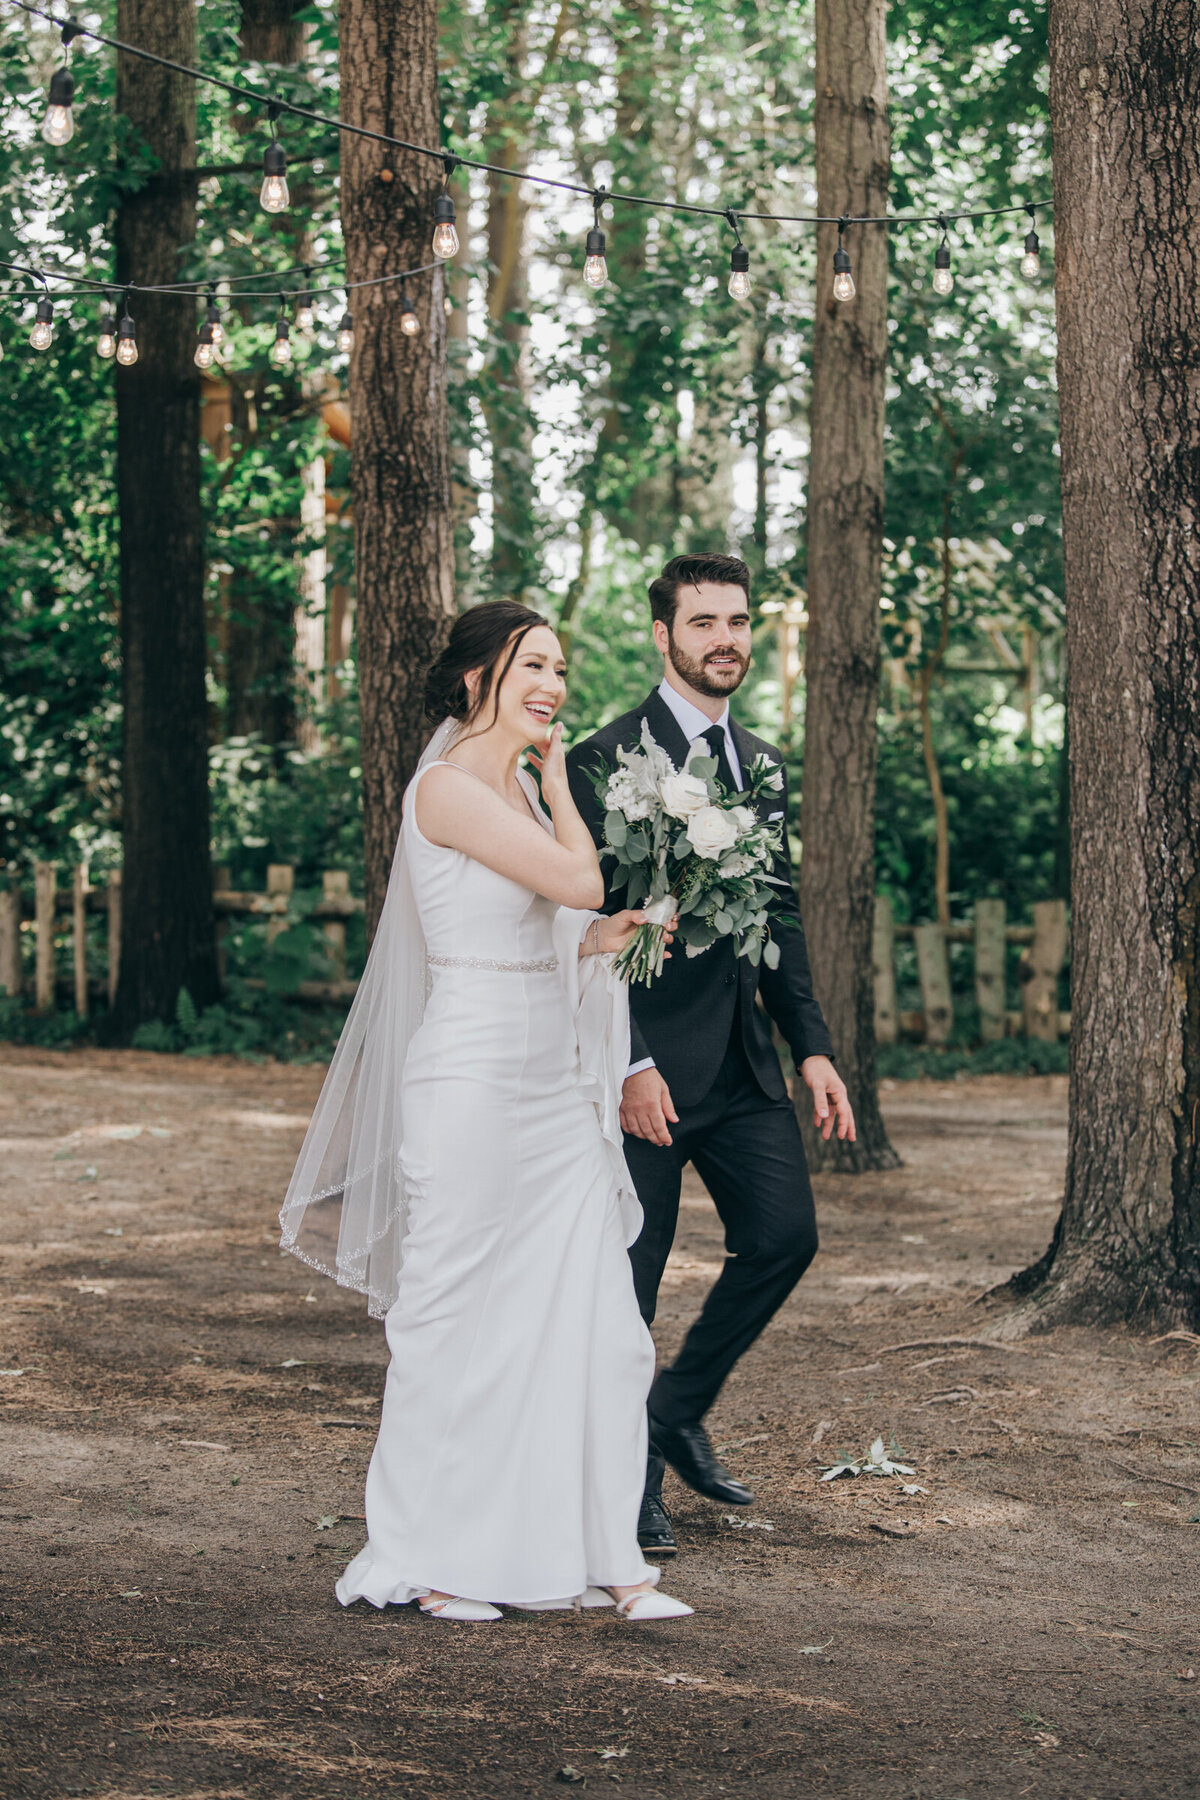 A wedding day first look between a bride and groom in an enchanted forest